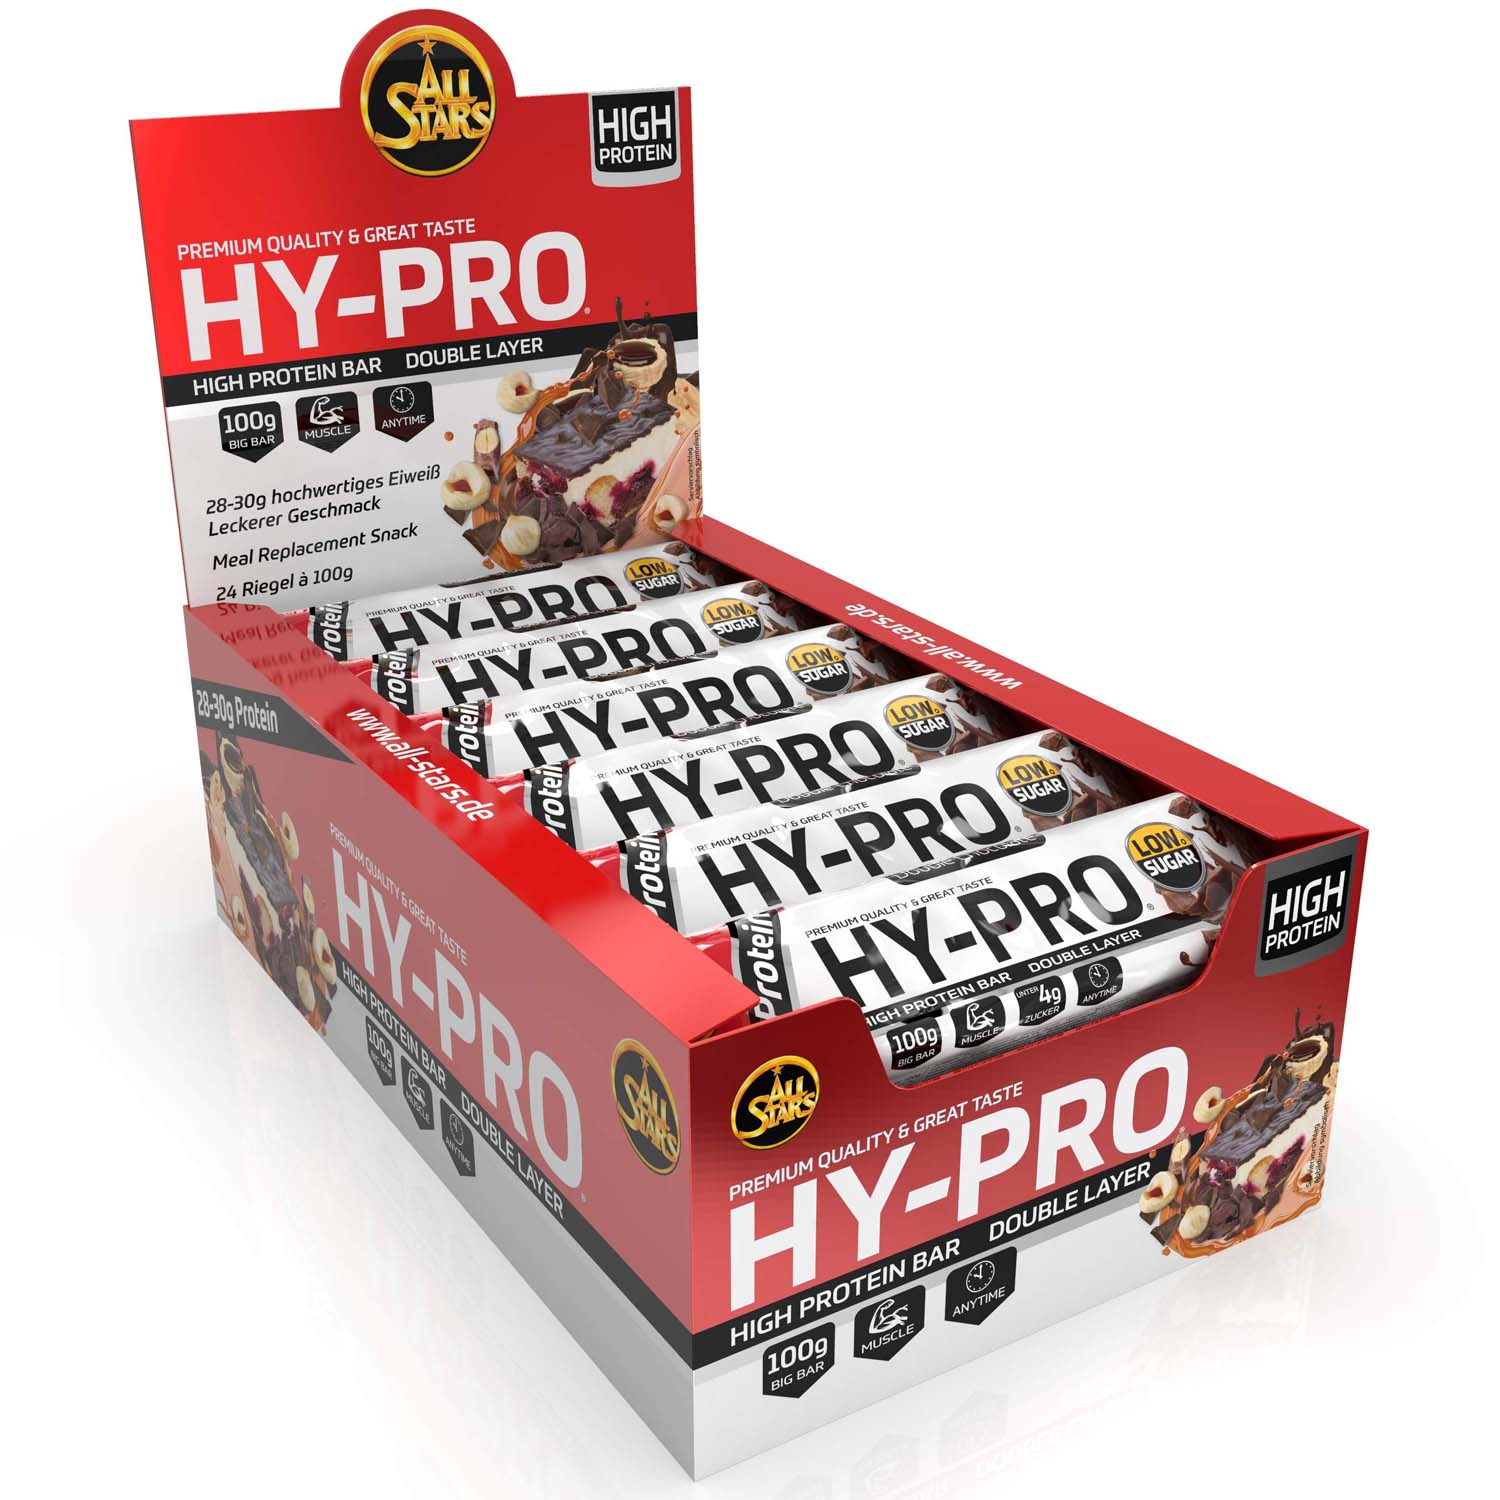 All Stars HY-Pro Box of 24 Pieces Double Chocolate